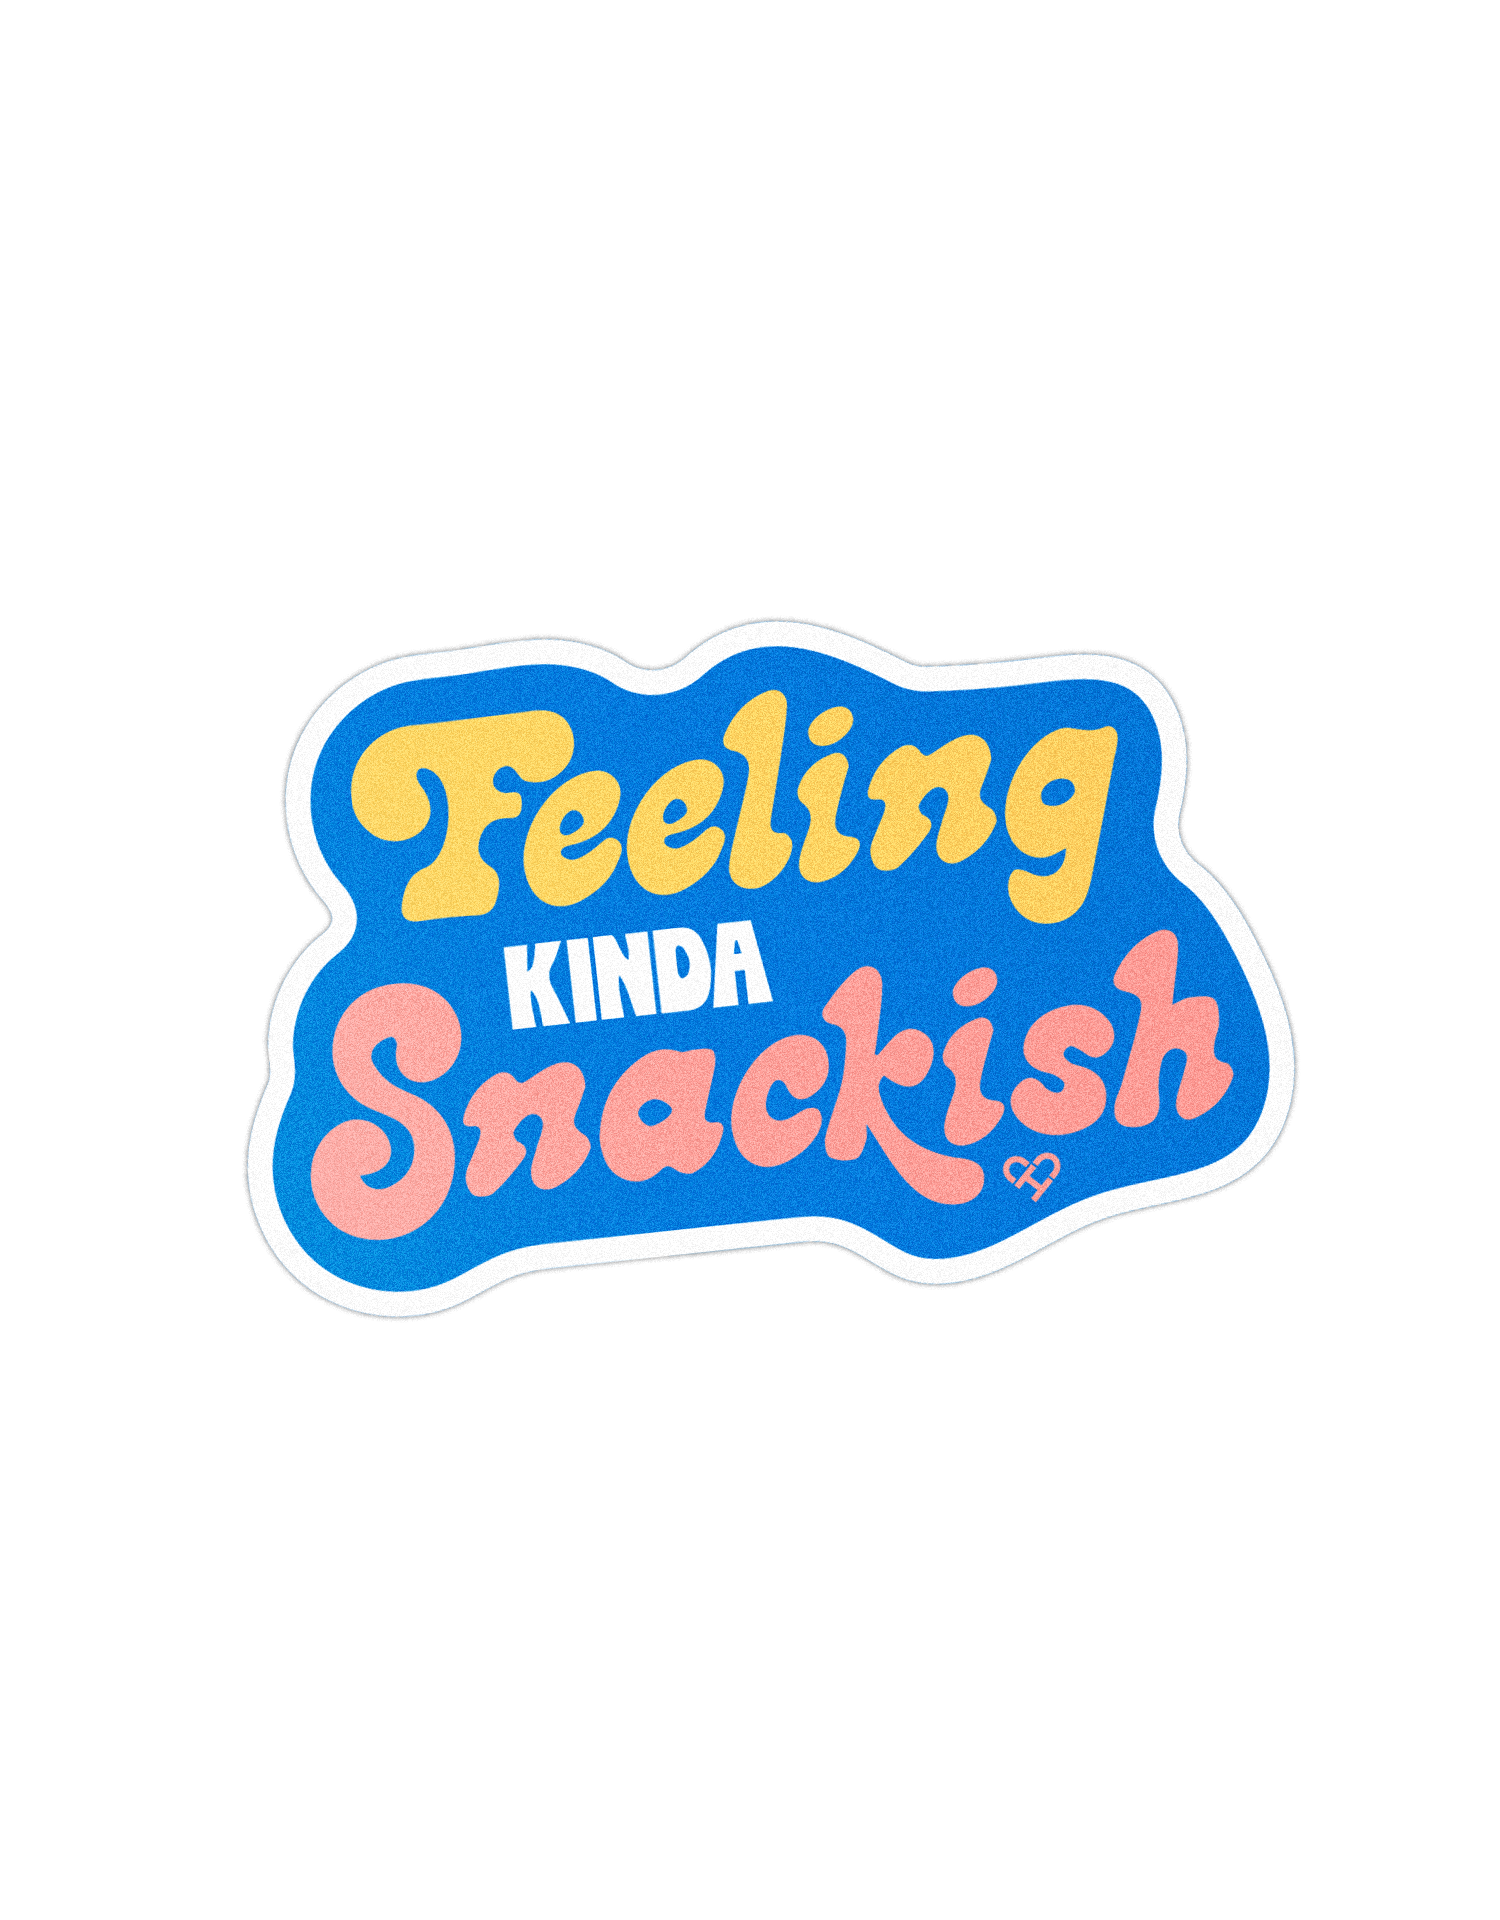 Snackish.png